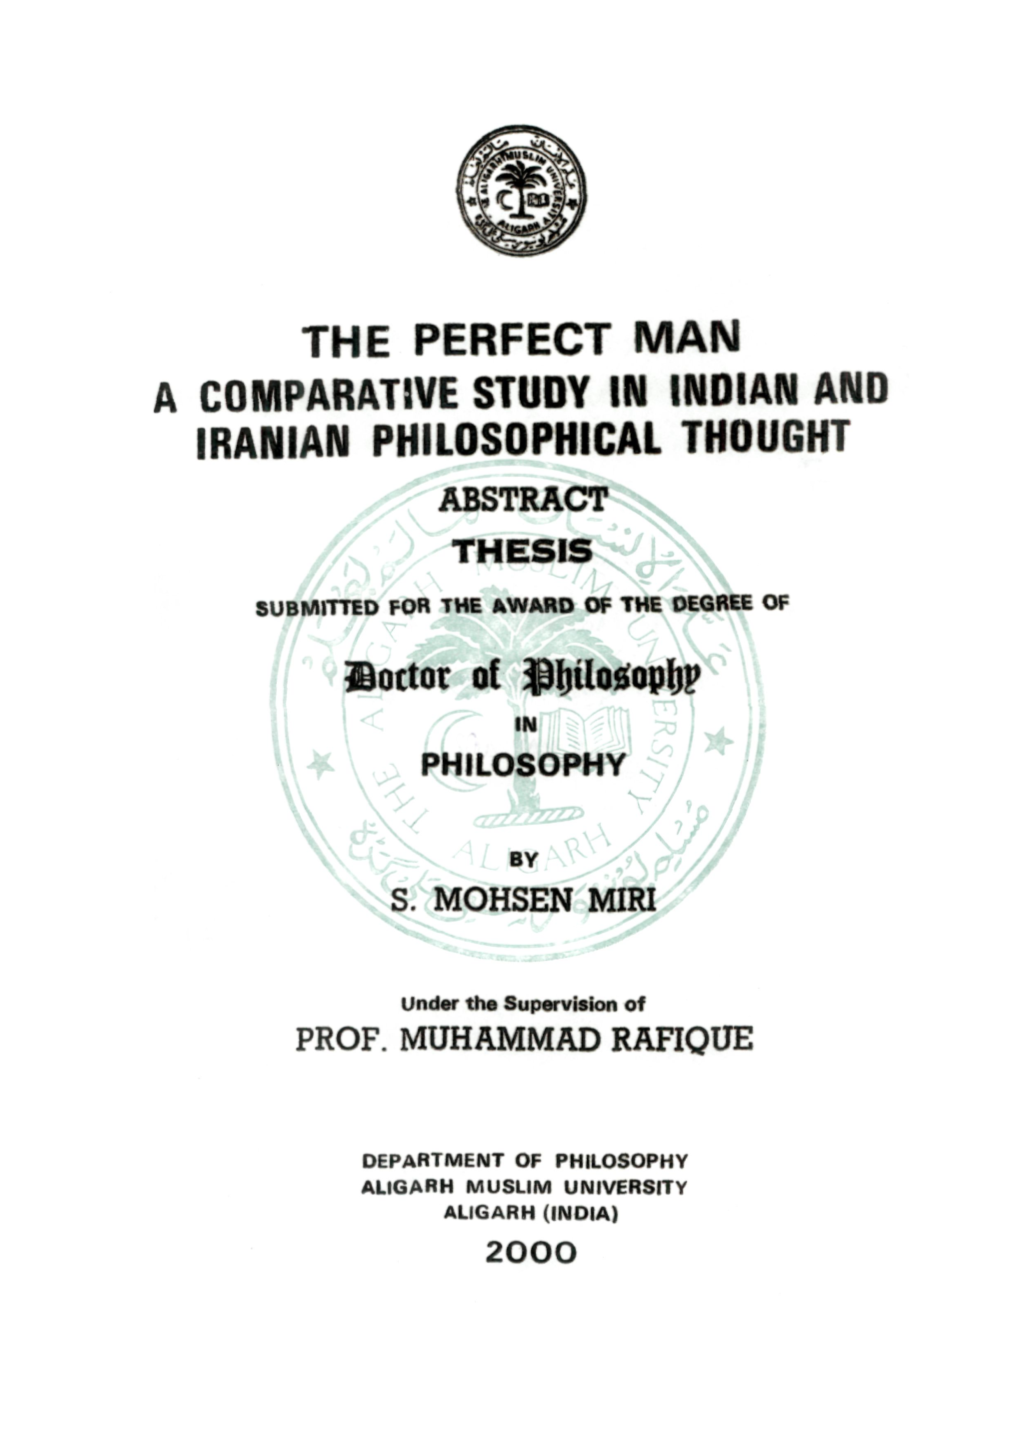 The Perfect Man a Comparative Study in Indian and Iranian Philosophical Thought Abstract Thesis^^